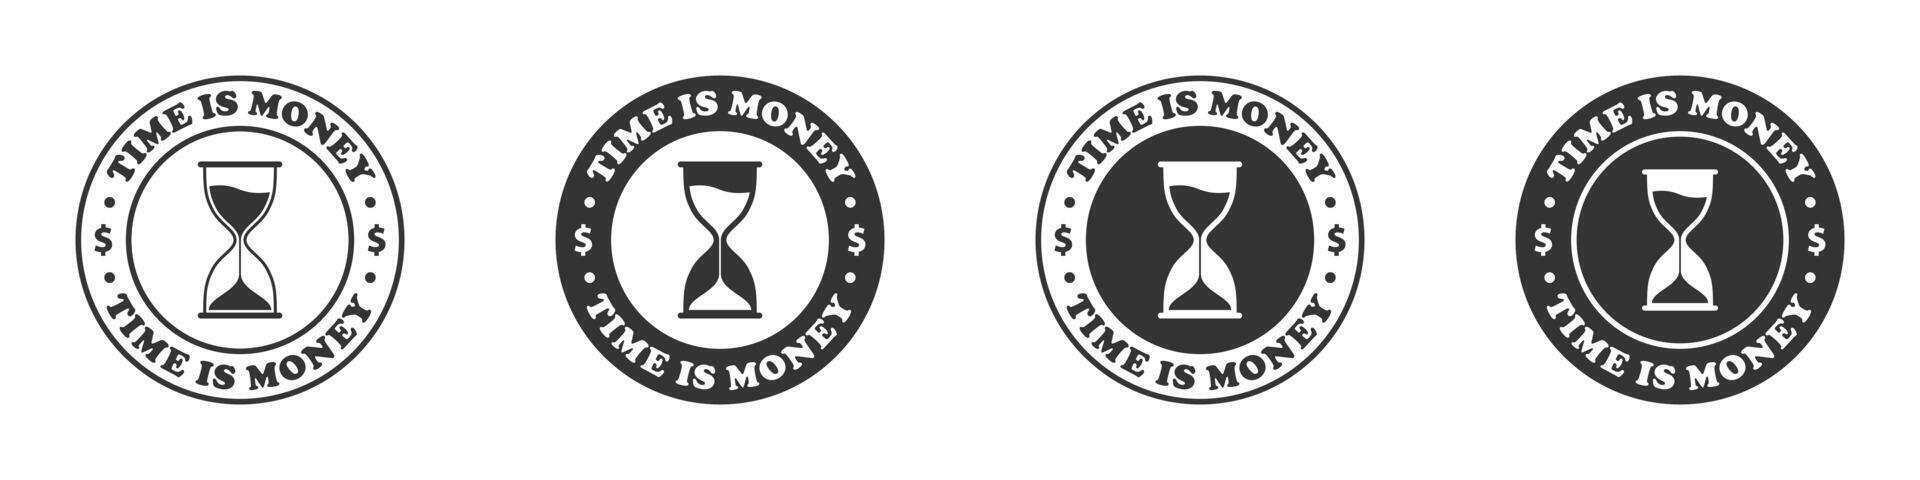 Time is money icon set. Vector illustration.